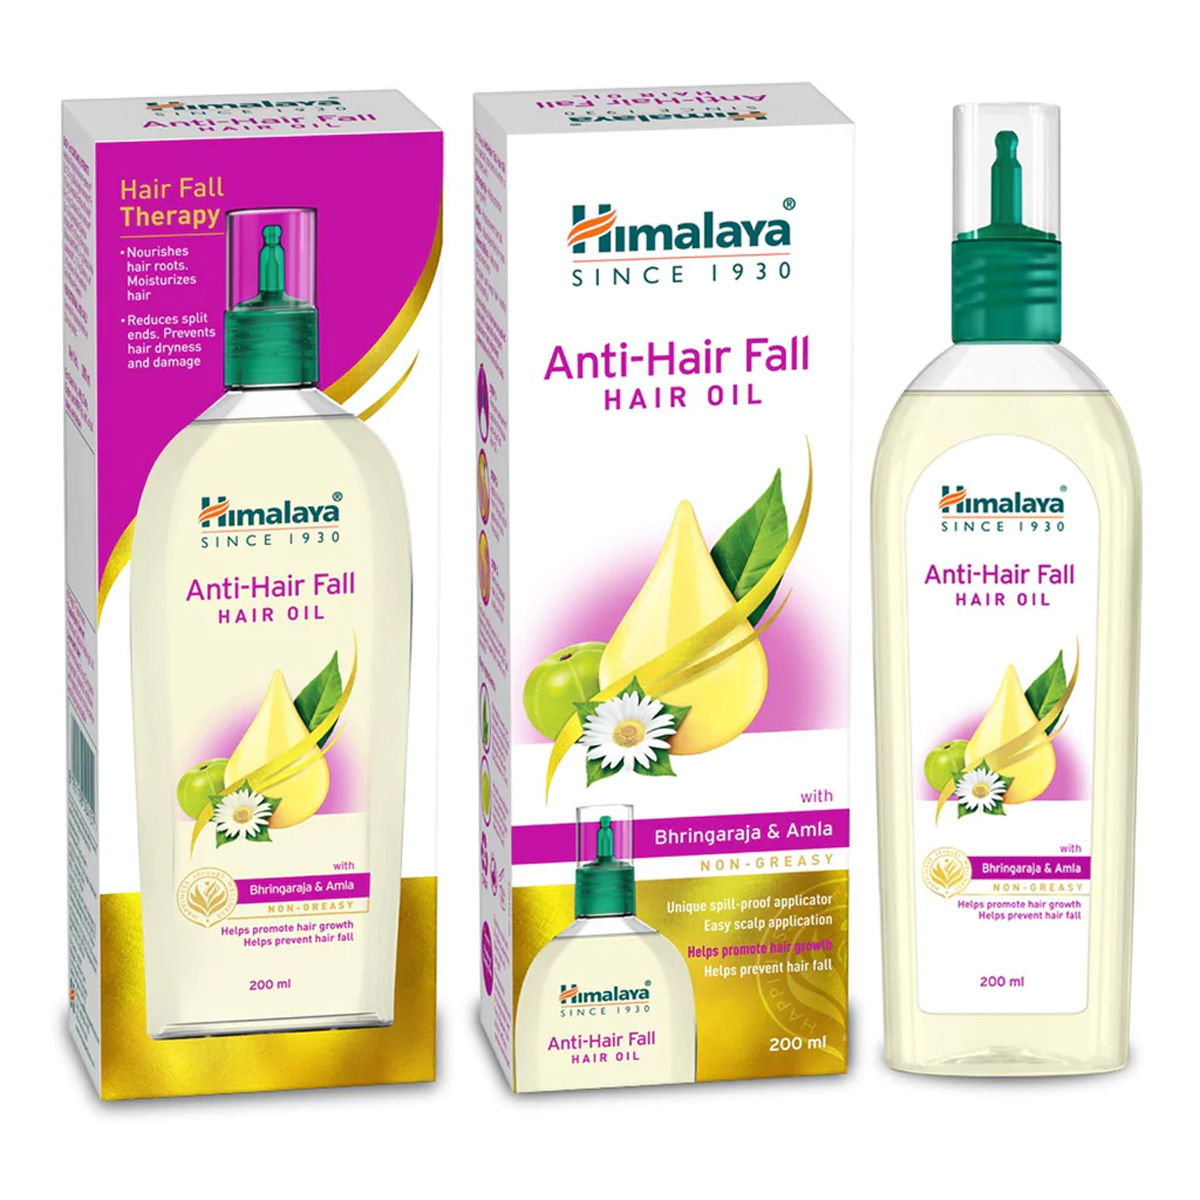 Himalaya Anti-Hair Fall Hair Oil, 200 ml Price, Uses, Side Effects,  Composition - Apollo Pharmacy